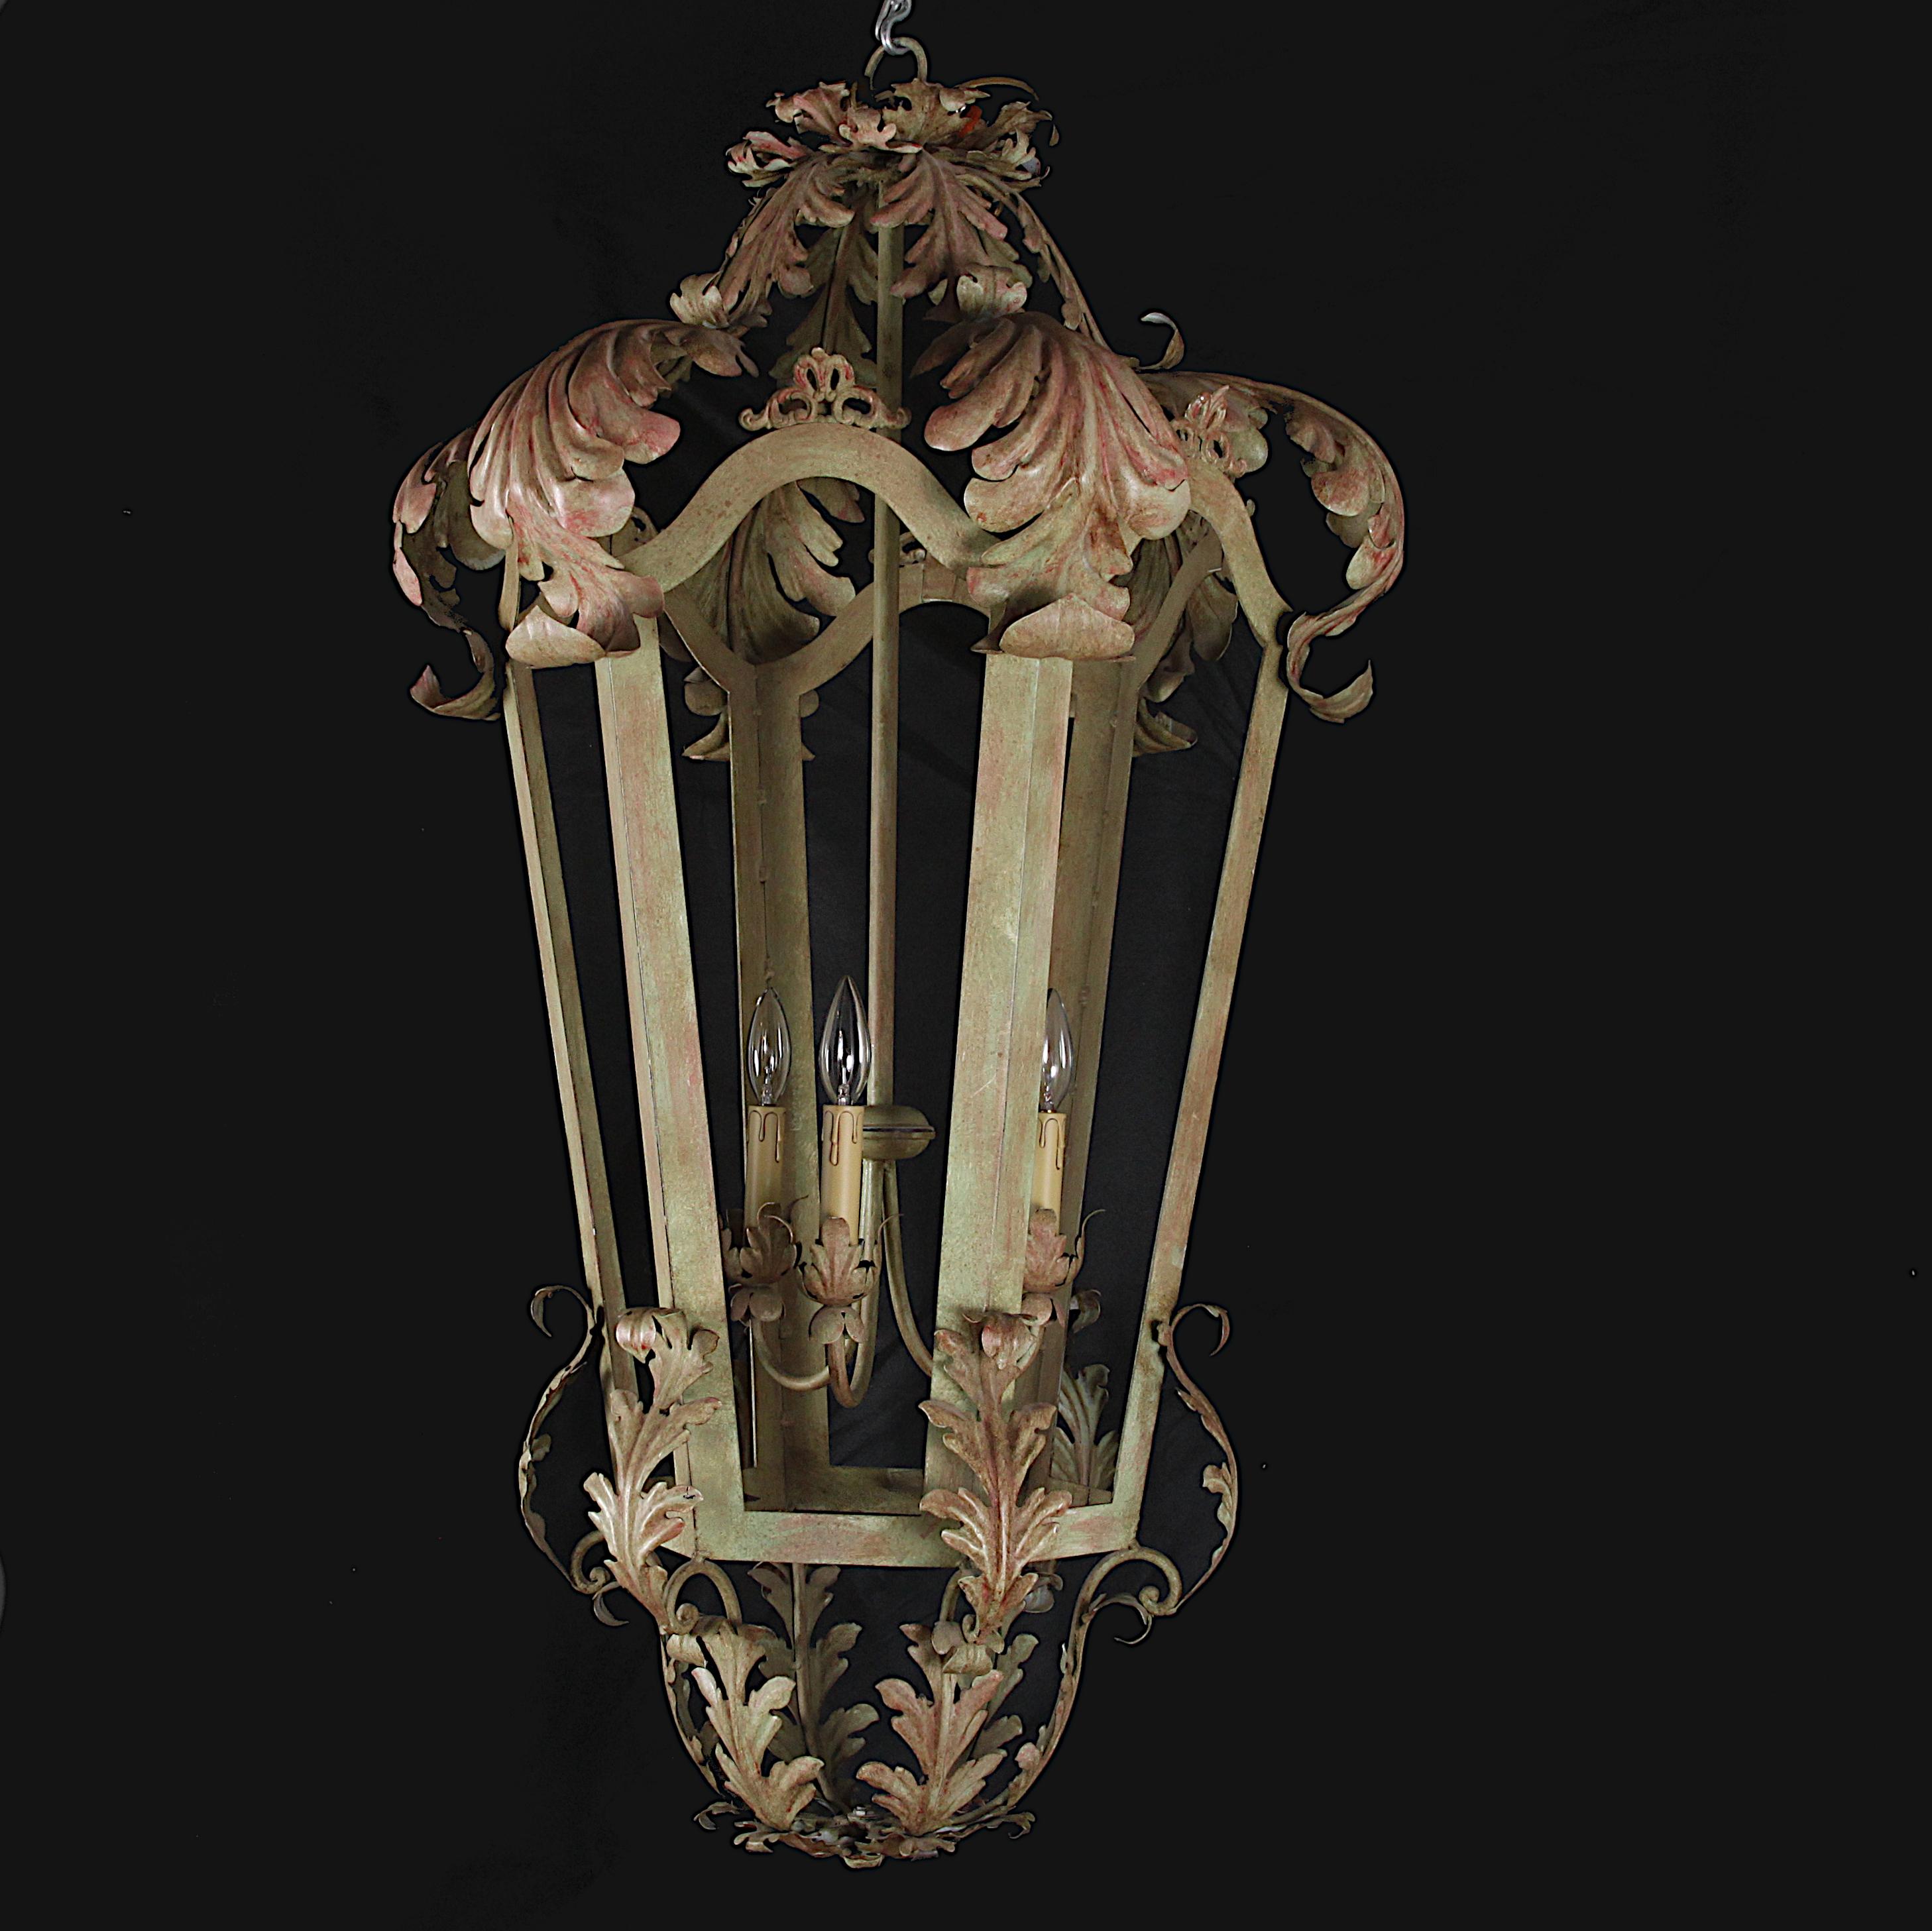 An oversized French vintage hanging three-light lantern, of an open-framed tapering hexagonal form with leafy foliage details to top and bottom.